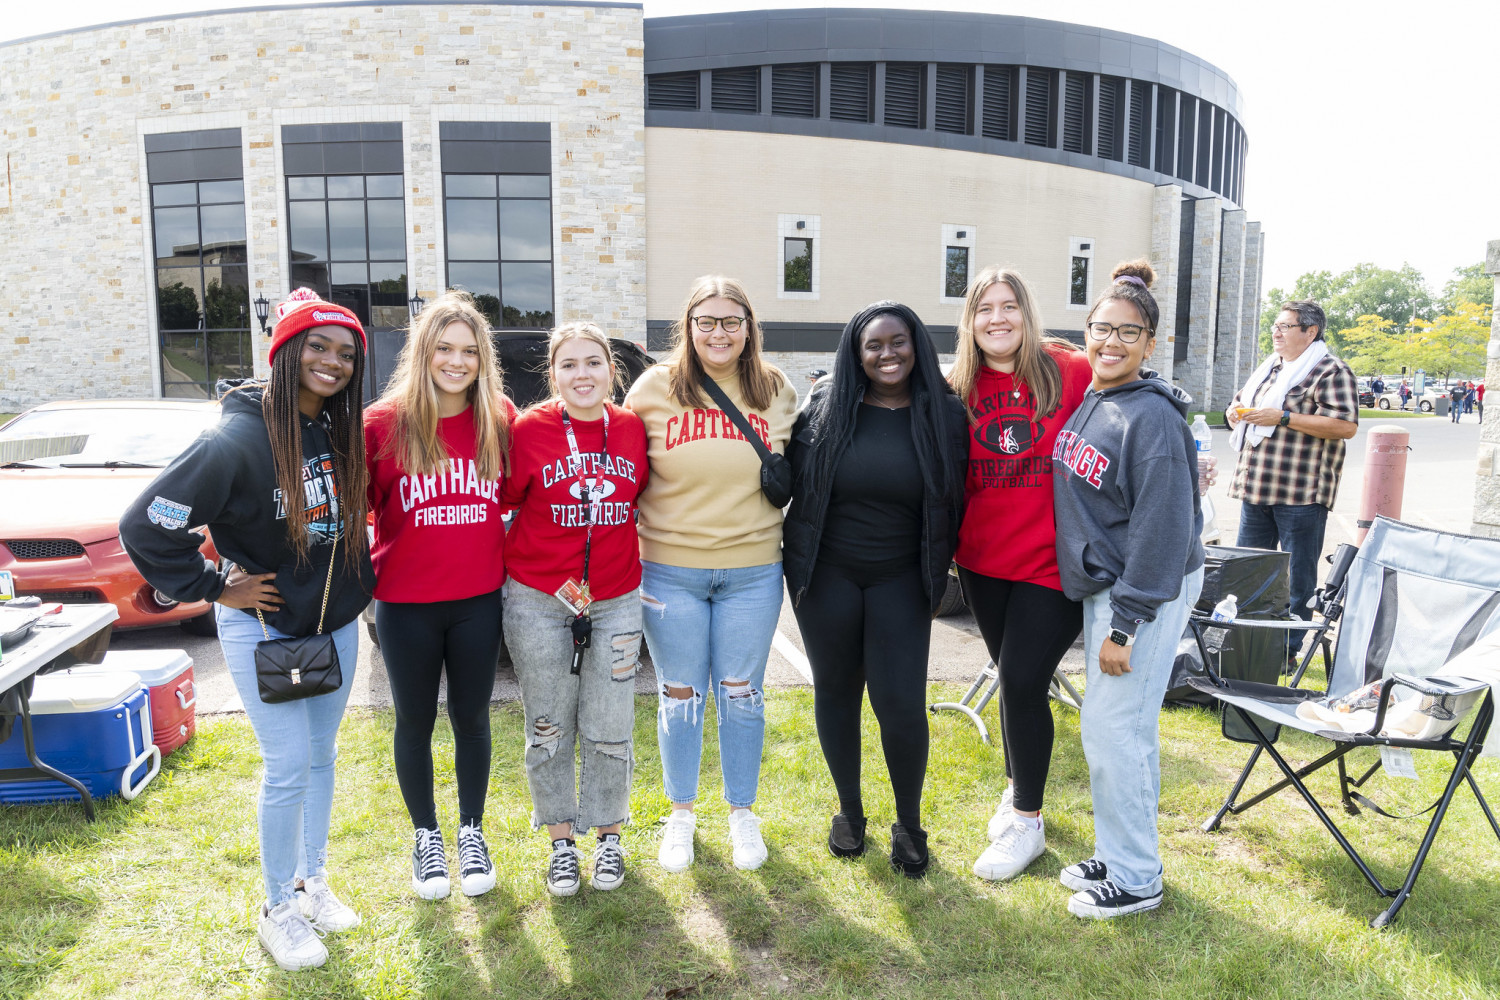 Alumni, students, and families gathered for a tailgate before the Homecoming Football game.